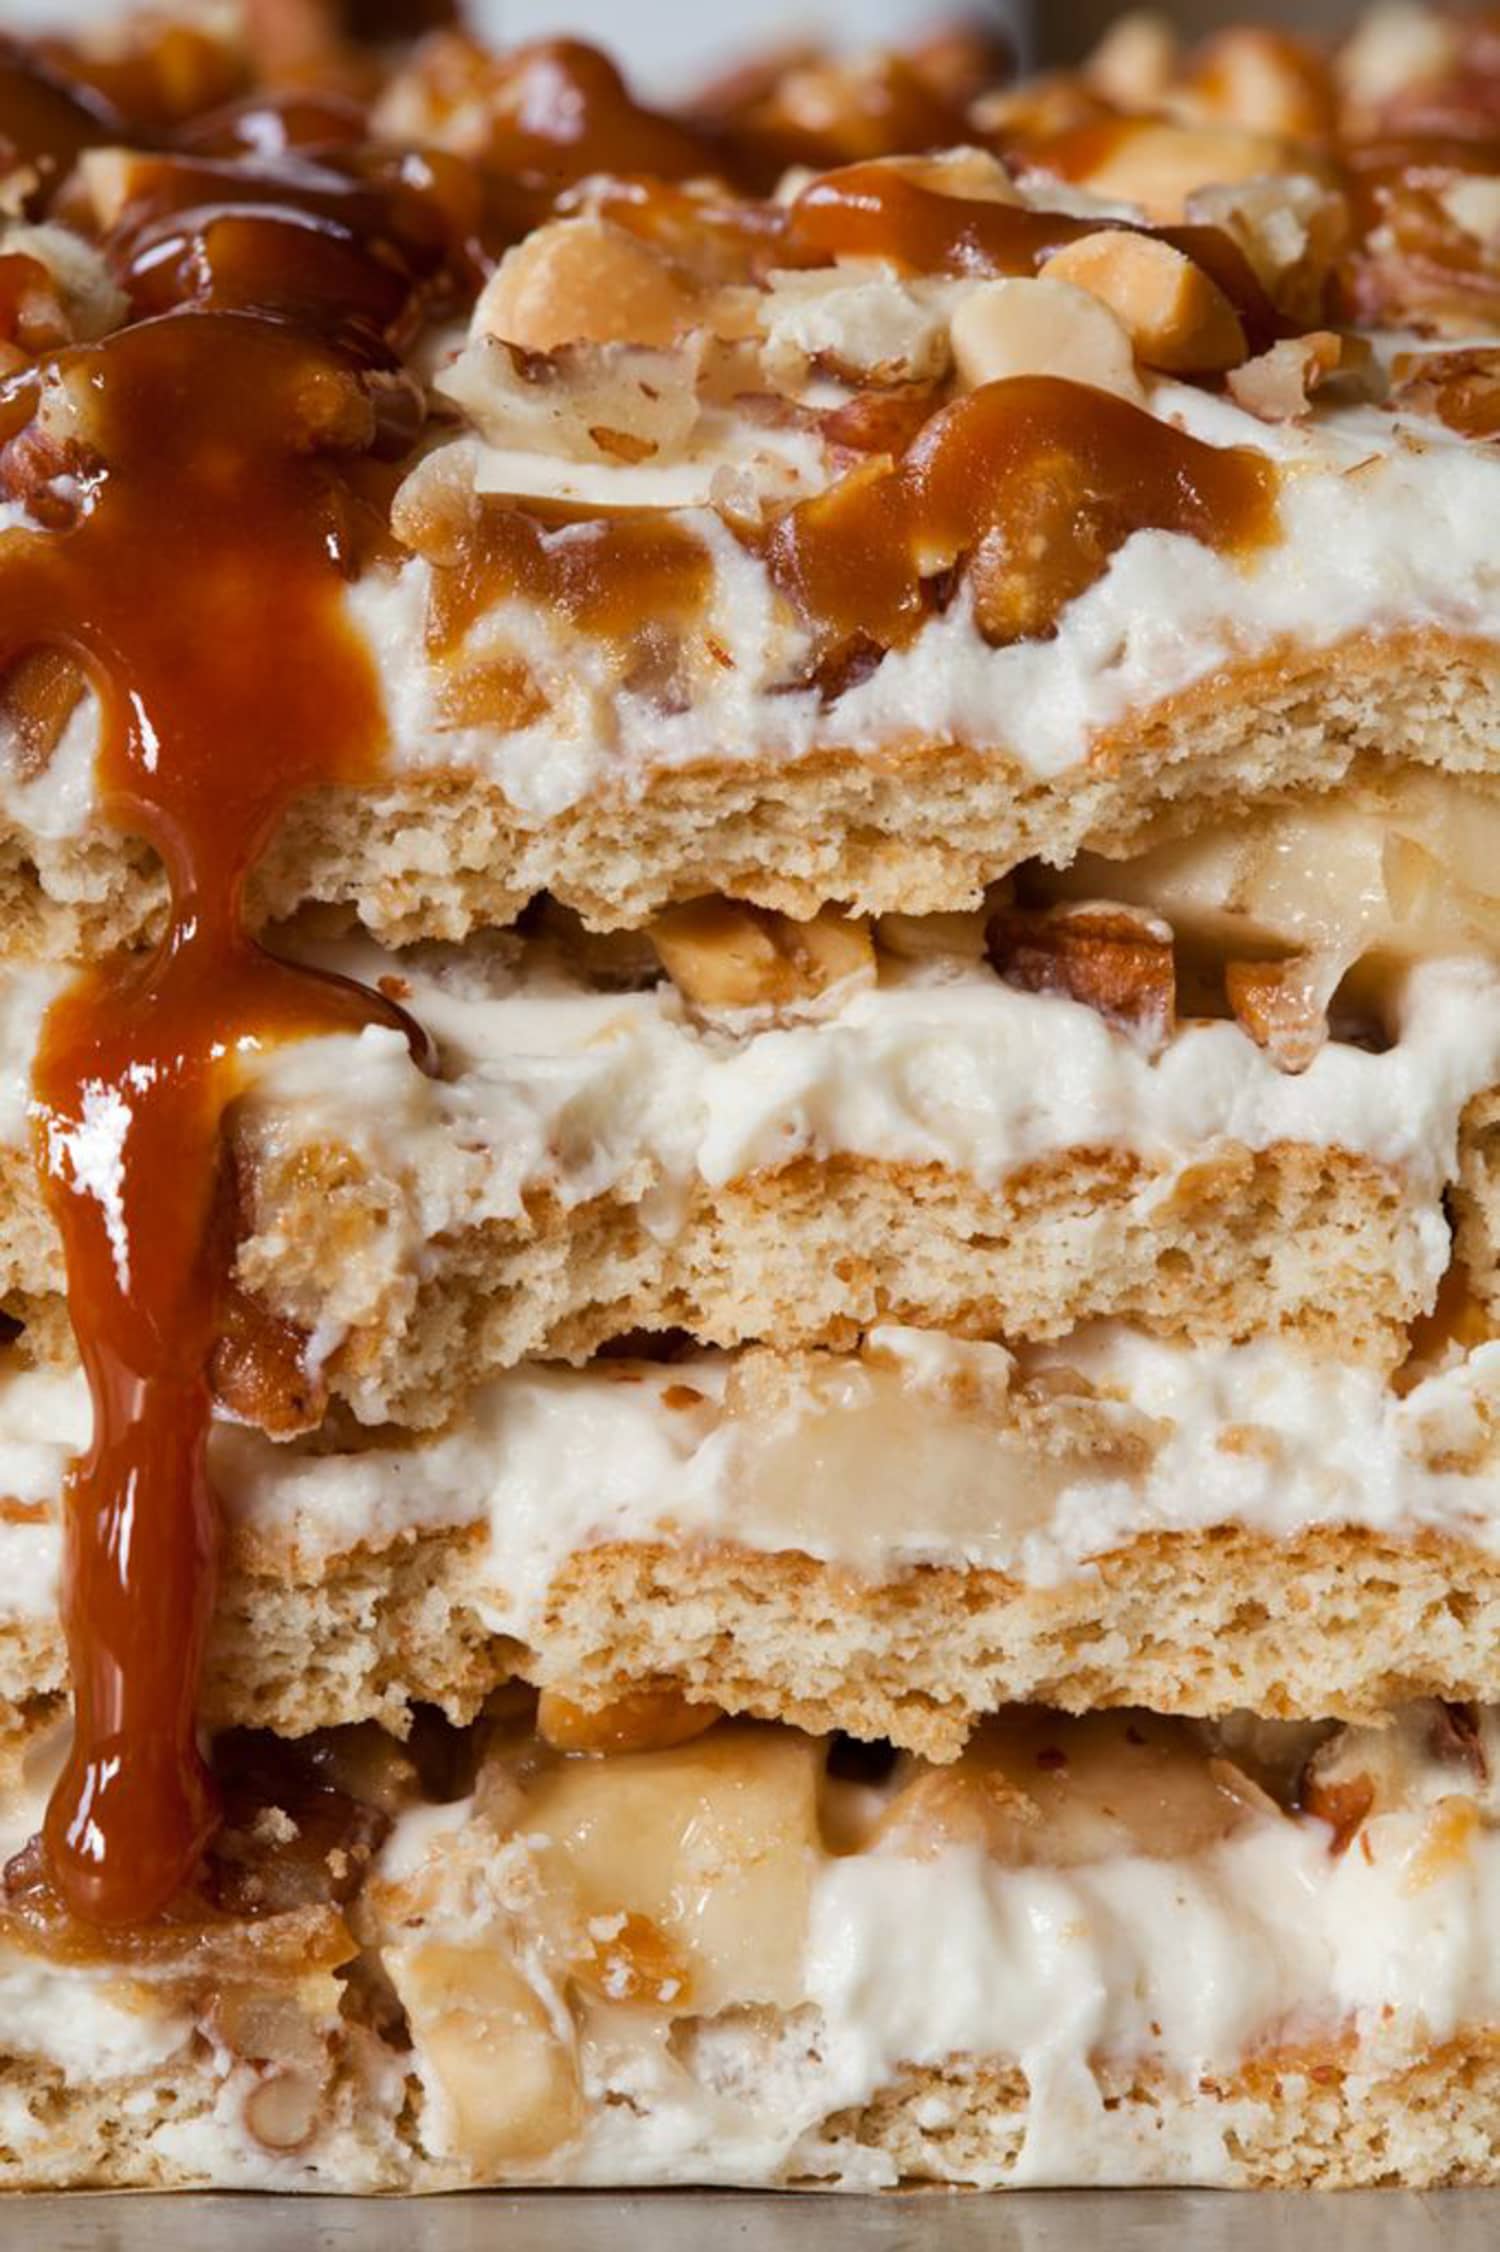 This No-Bake Banana and Peanut Butter Caramel Icebox Cake Is the Best Recipe I’ve Ever Developed